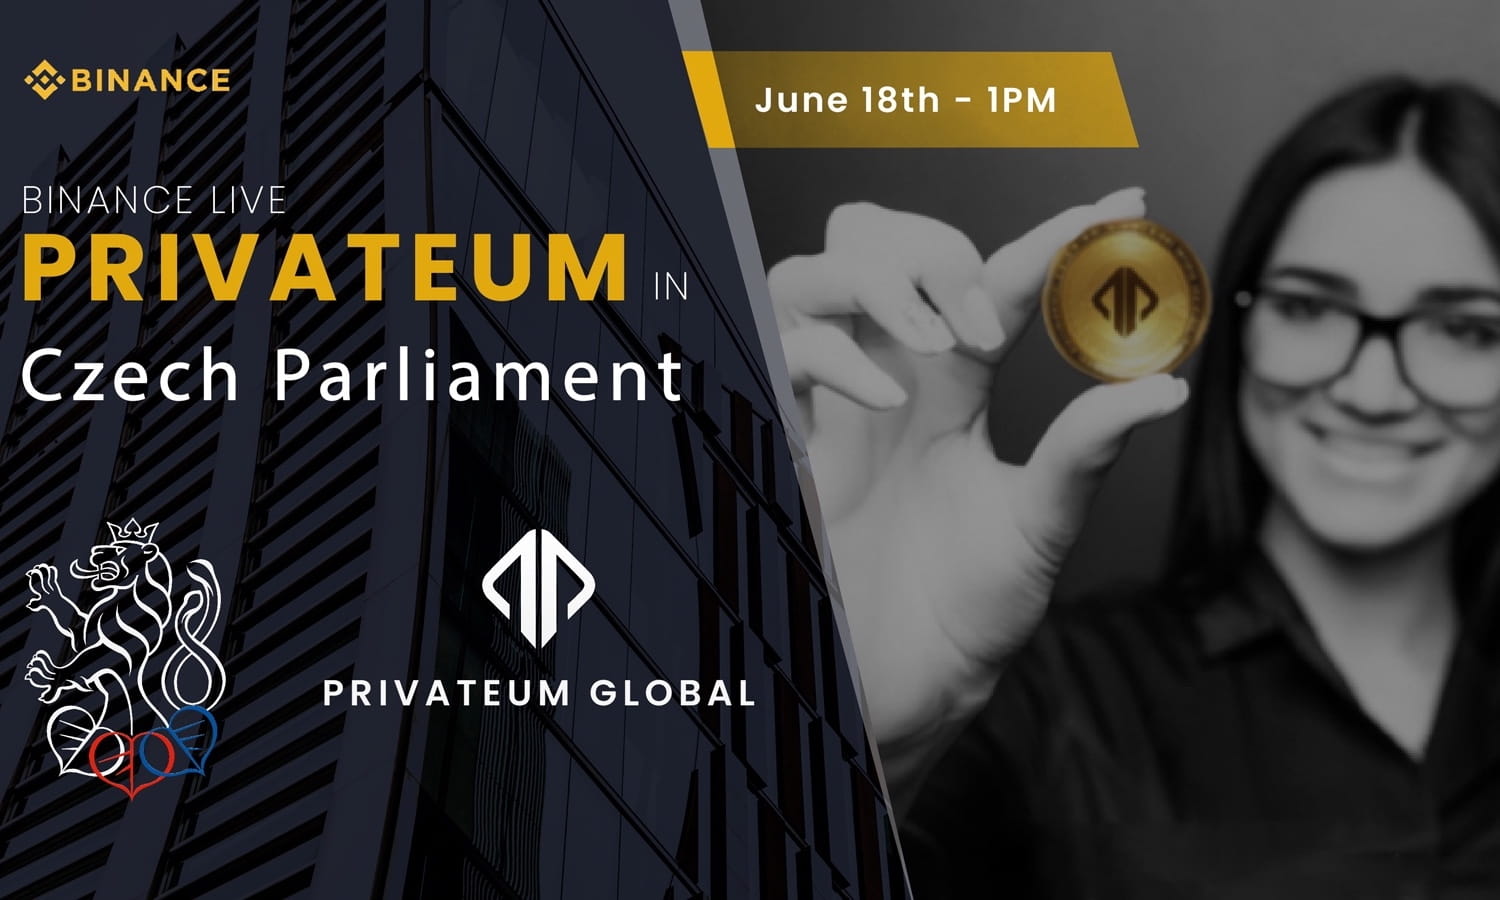 Privateum Global - Live Stream from the Czech Parliament